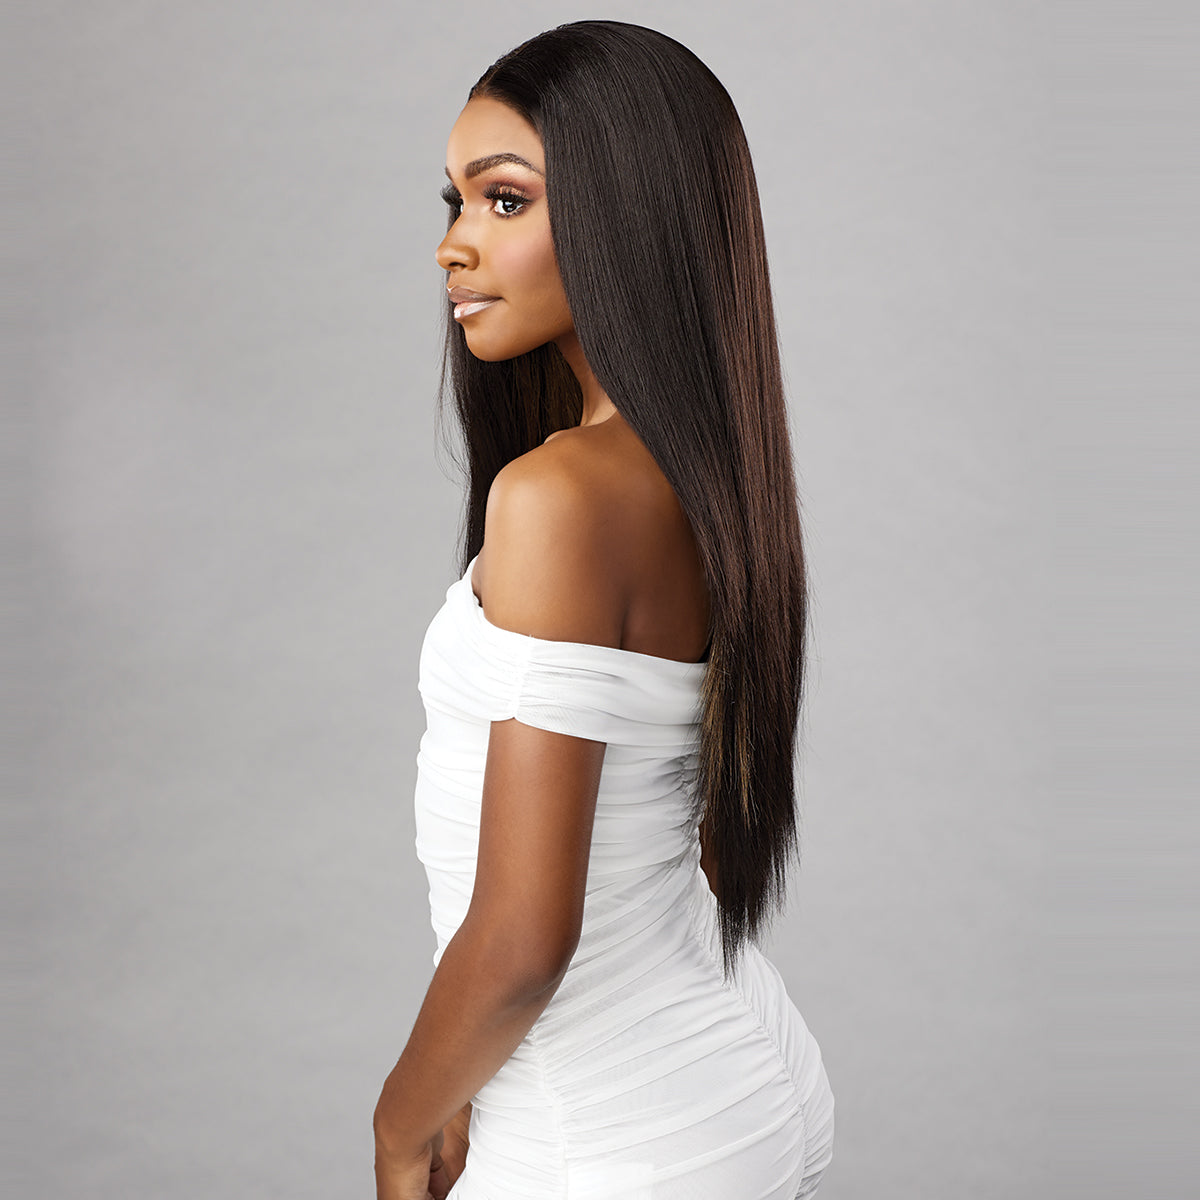 Sensationnel Barelace Synthetic Hair 13x6 Glueless BARELUXE Lace Wig - 13X6 UNIT 1